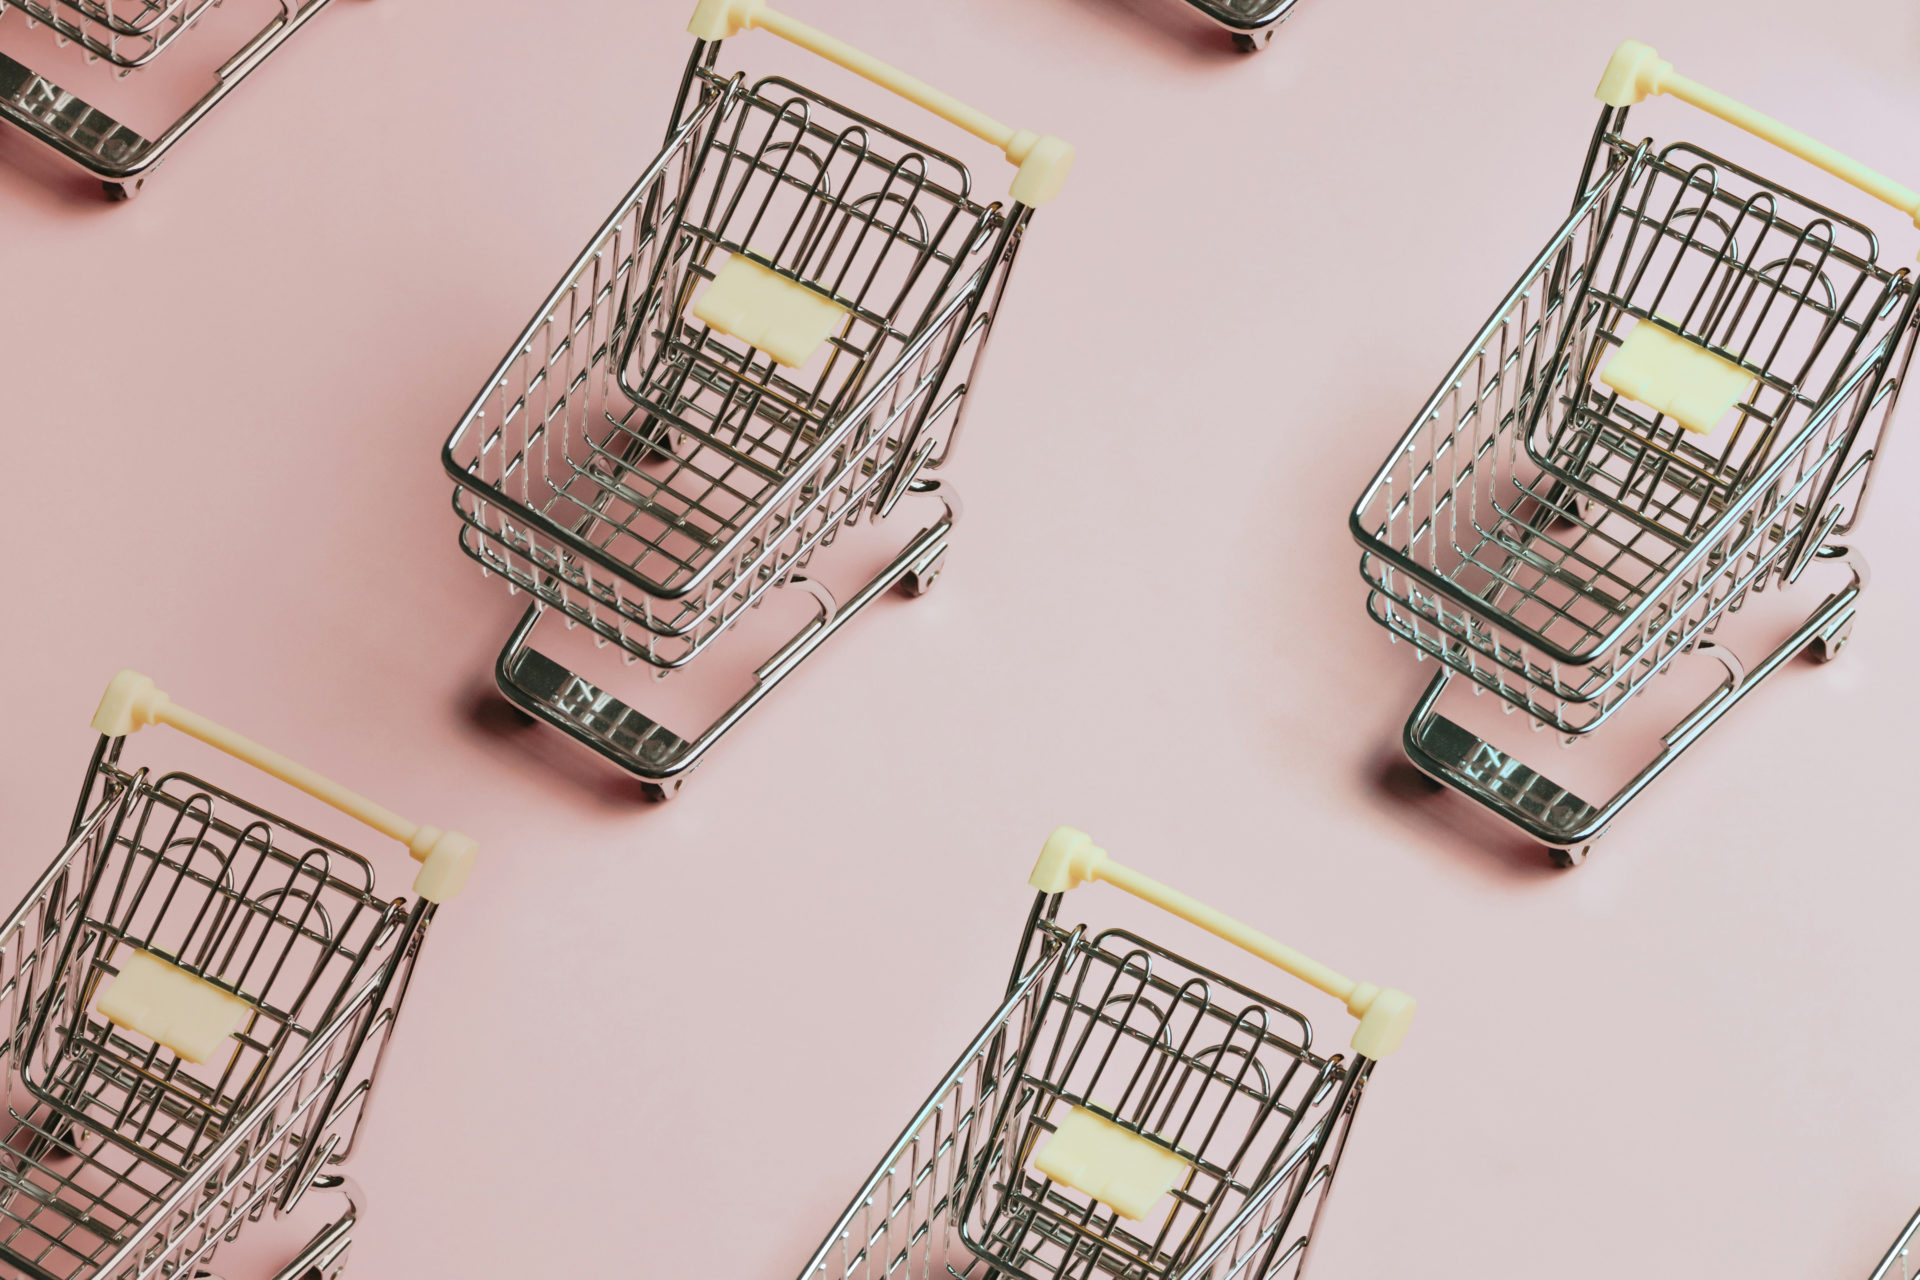 Canada Digital Adoption Program Featured Image with Shopping Carts